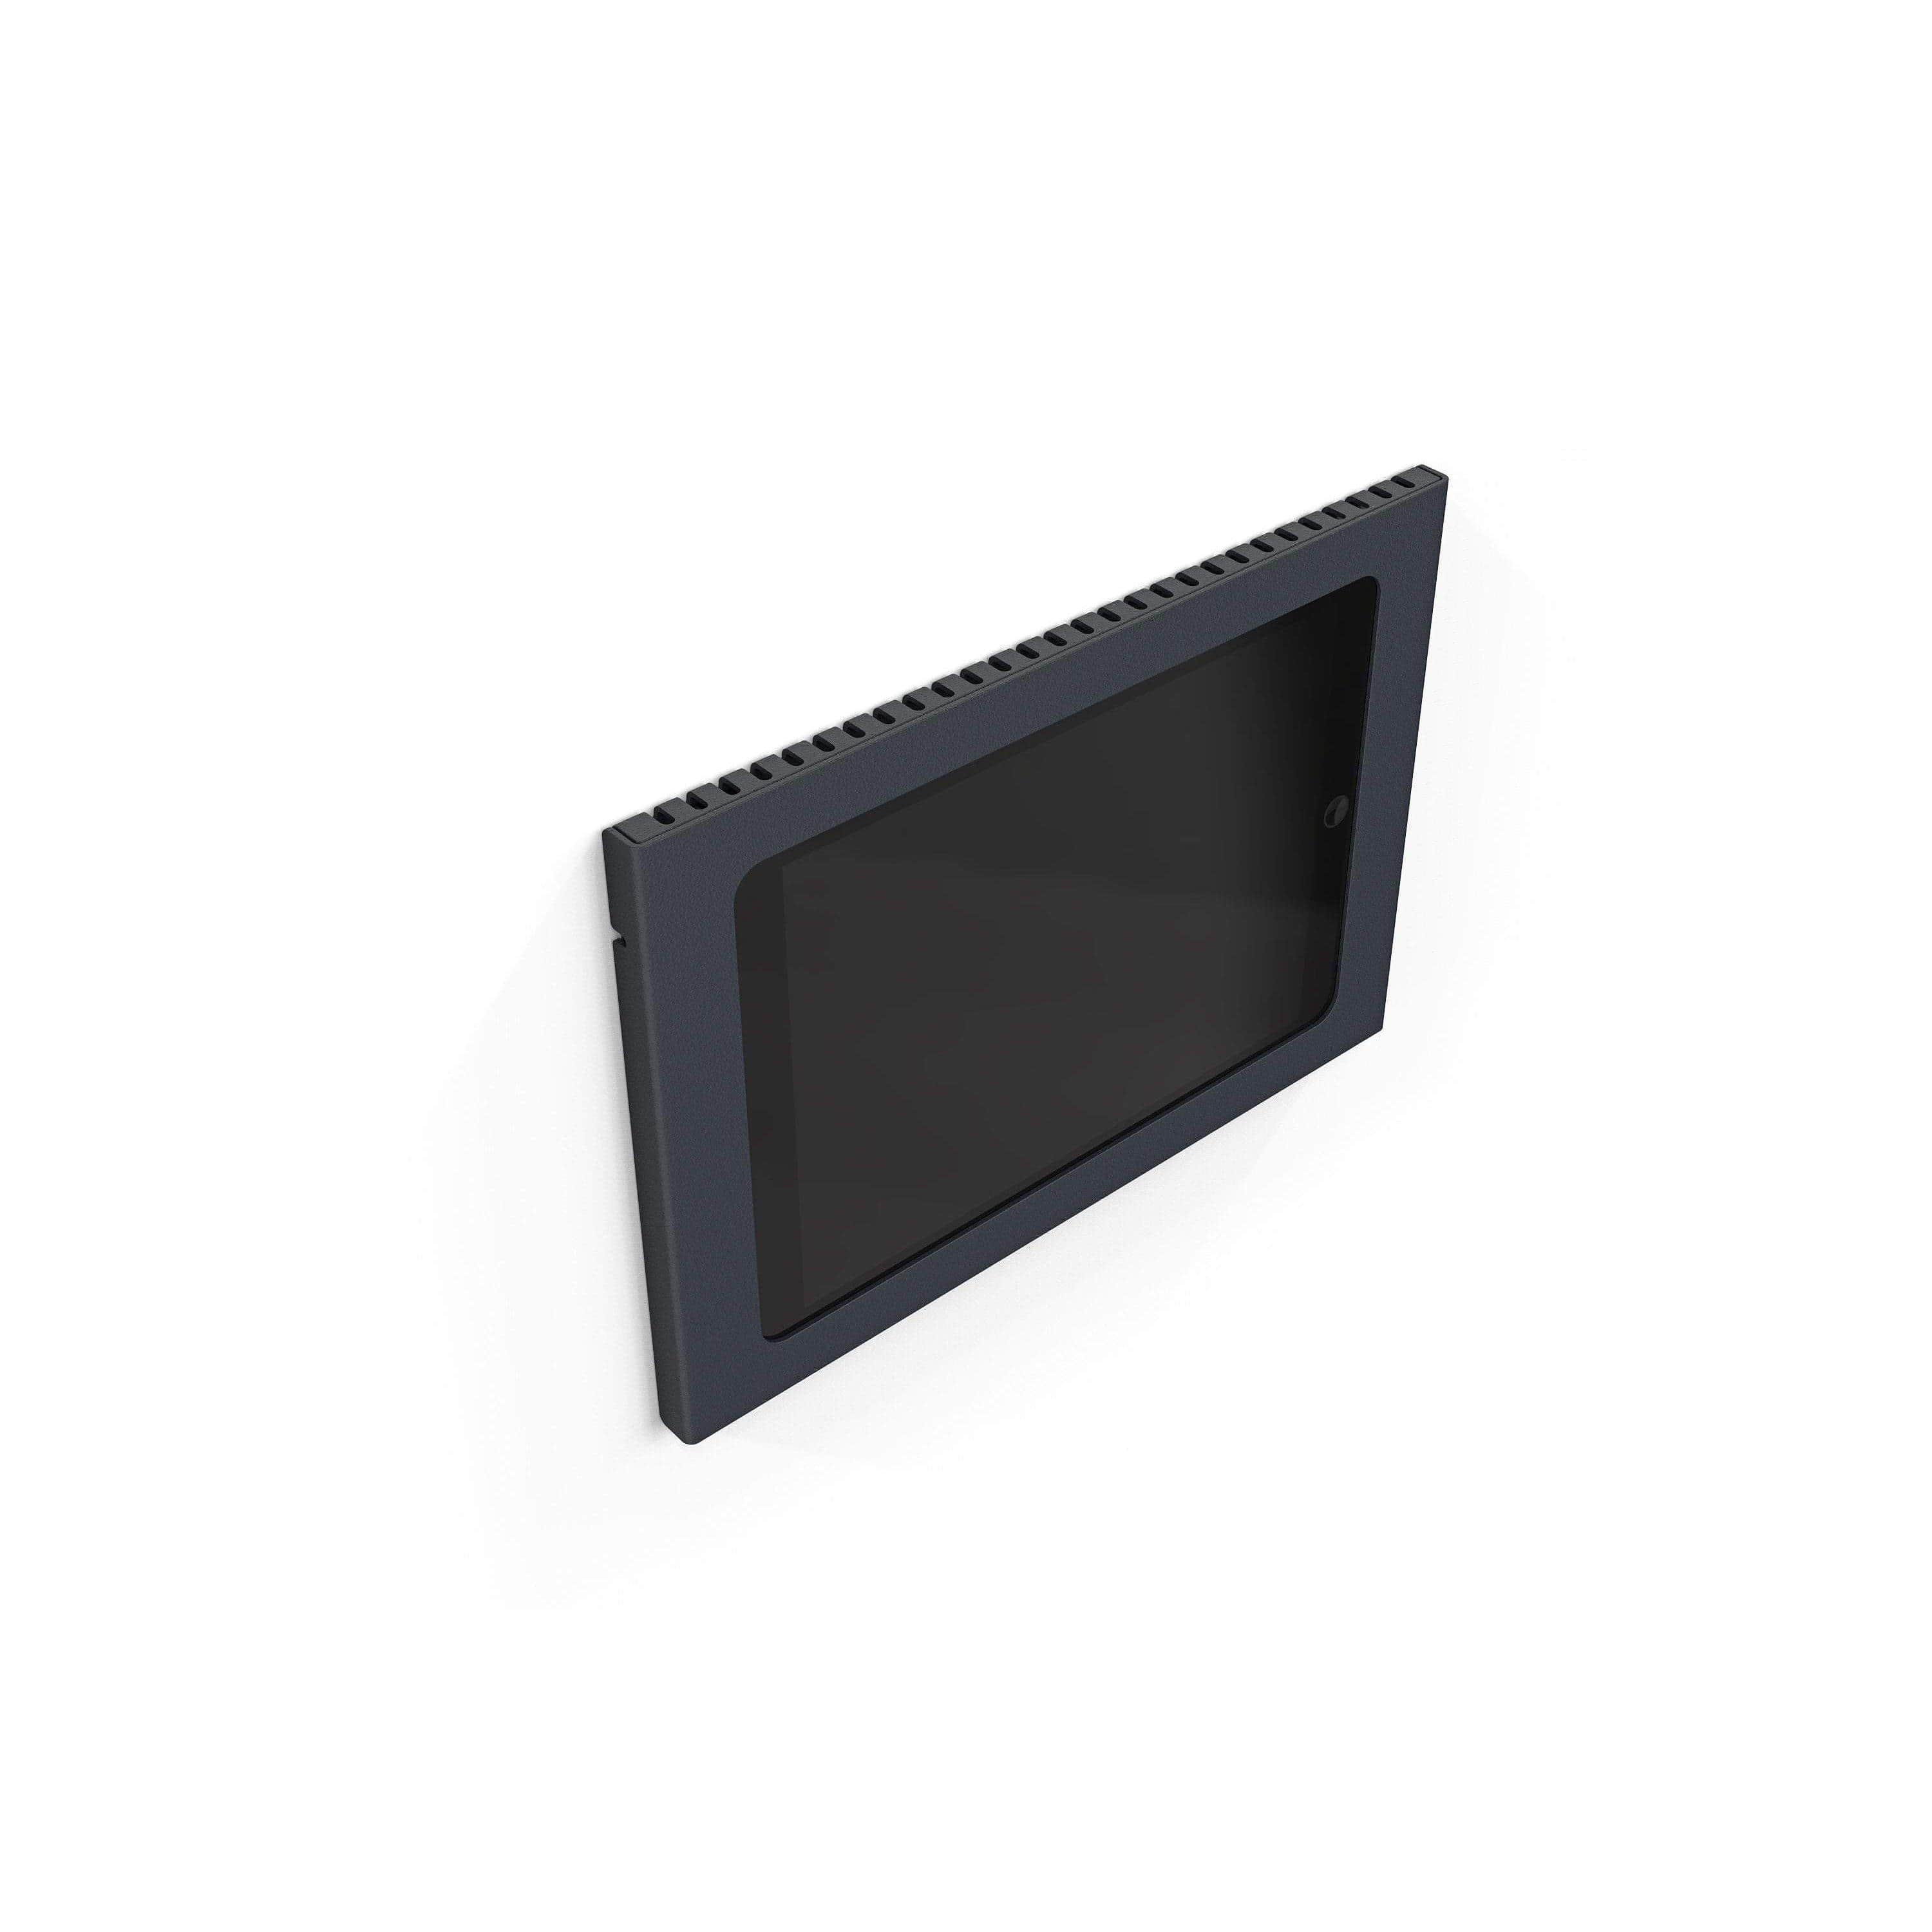 PoE Texas For Tablets Heckler Wall Mount Enclosure with Power for iPad for Digital Signage, Zoom Conference Room Schedulers, and More - 802.3af - Fits 10.2" iPad 7th Generation